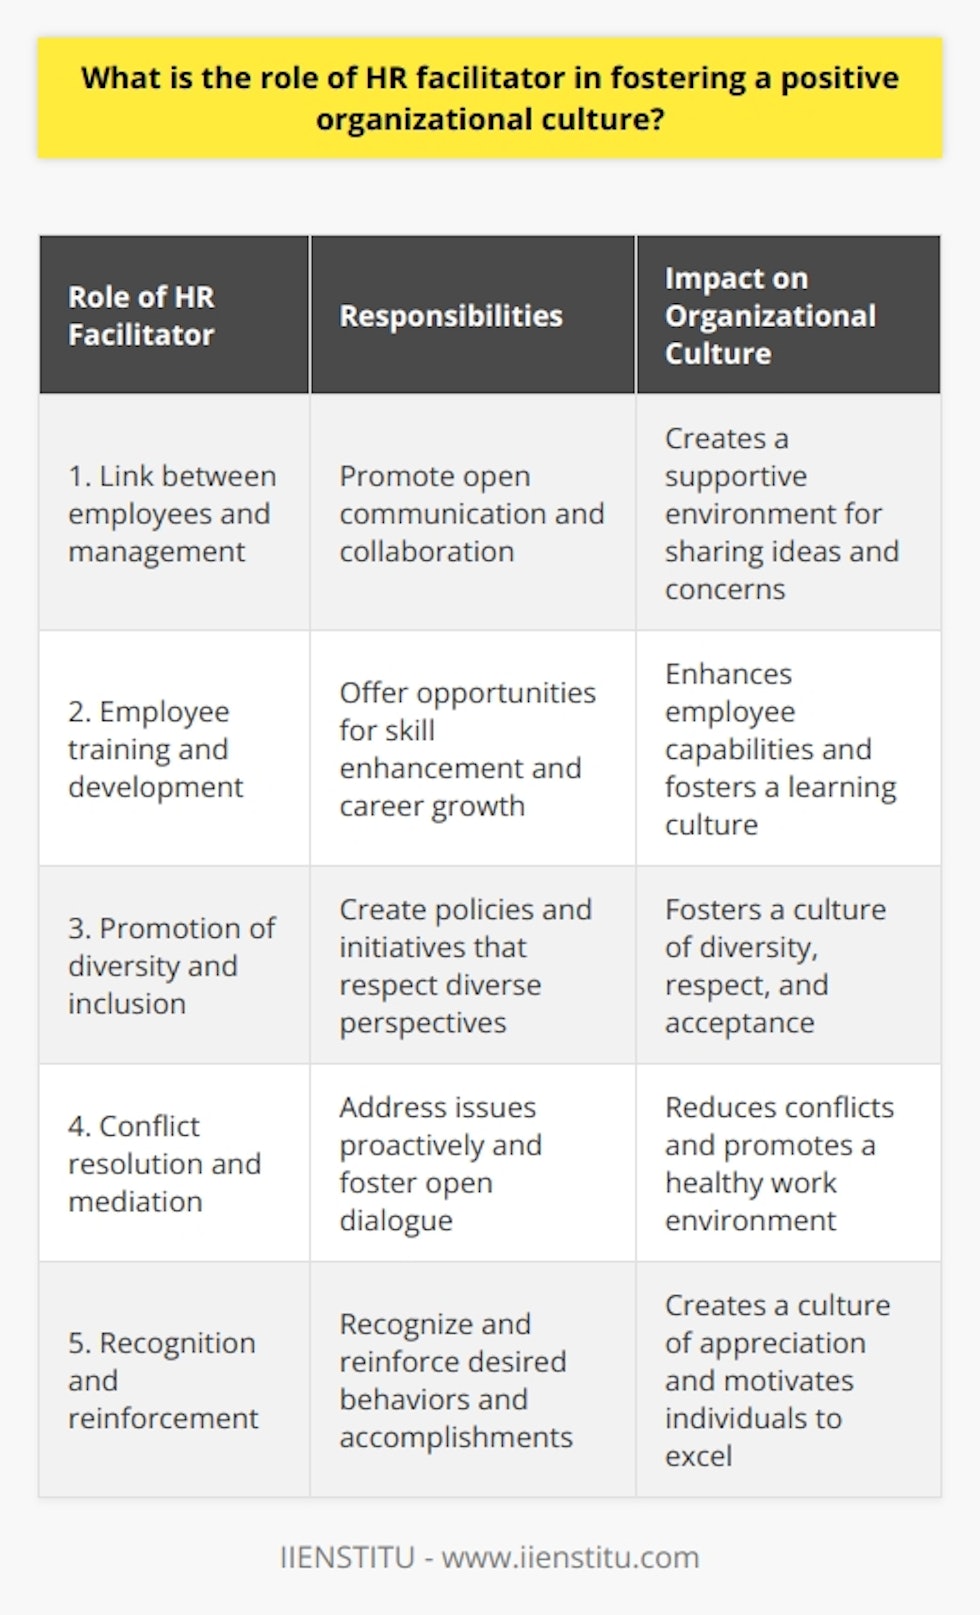 The role of HR facilitator in fostering a positive organizational culture is crucial as they act as a link between employees and management. HR facilitators promote open communication and collaboration among employees, creating a supportive environment where ideas and concerns can be shared. They also play a significant role in employee training and development, offering opportunities for skill enhancement and career growth. HR facilitators work to promote diversity and inclusion, creating policies and initiatives that ensure diverse perspectives are respected. They also serve as mediators during conflicts, addressing issues proactively and fostering open dialogue. Lastly, HR facilitators recognize and reinforce desired behaviors and accomplishments, promoting a culture of appreciation and motivating individuals to excel. Overall, HR facilitators contribute to an engaged, supported, and motivated workforce, leading to a positive organizational culture.